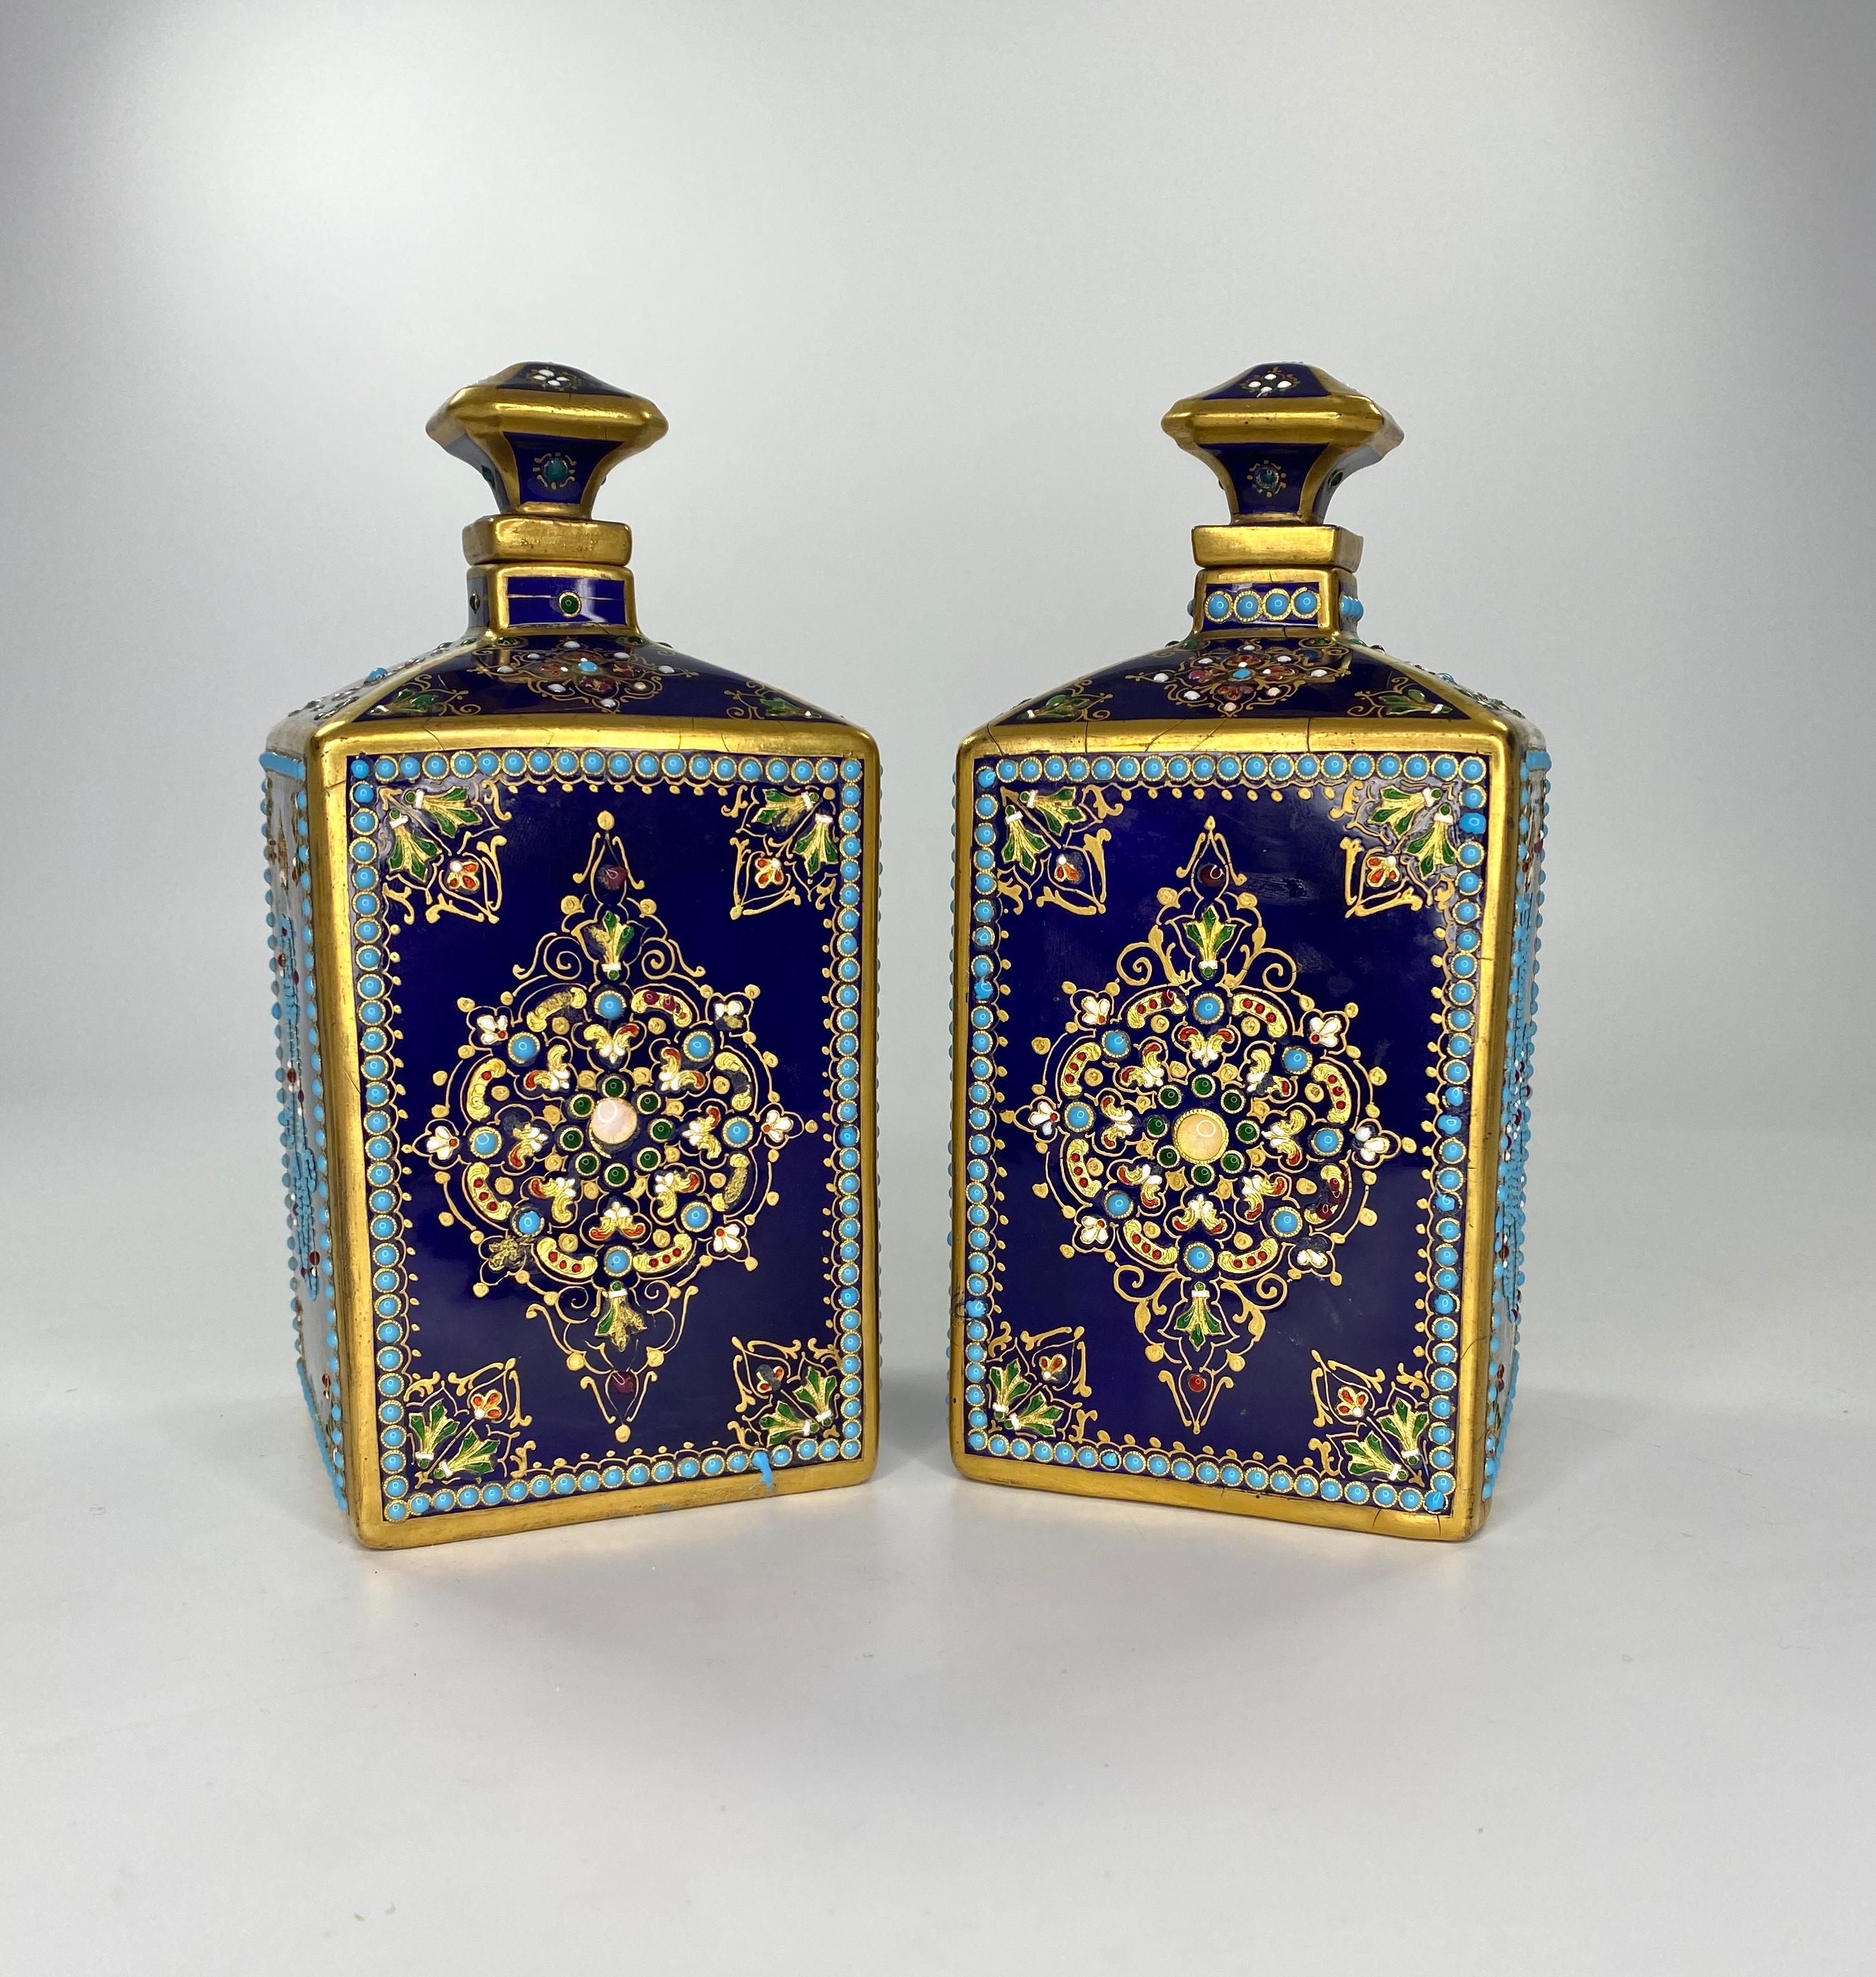 Pair of Sevres style ‘Jewelled’ perfume bottles, circa 1880. The square form bottles, ‘jewelled’ with the monogrammed of Louis XVI, and Marie Antoinette, beneath gilt crowns. The other sides, decorated with elaborate gilt scroll motifs, embellished